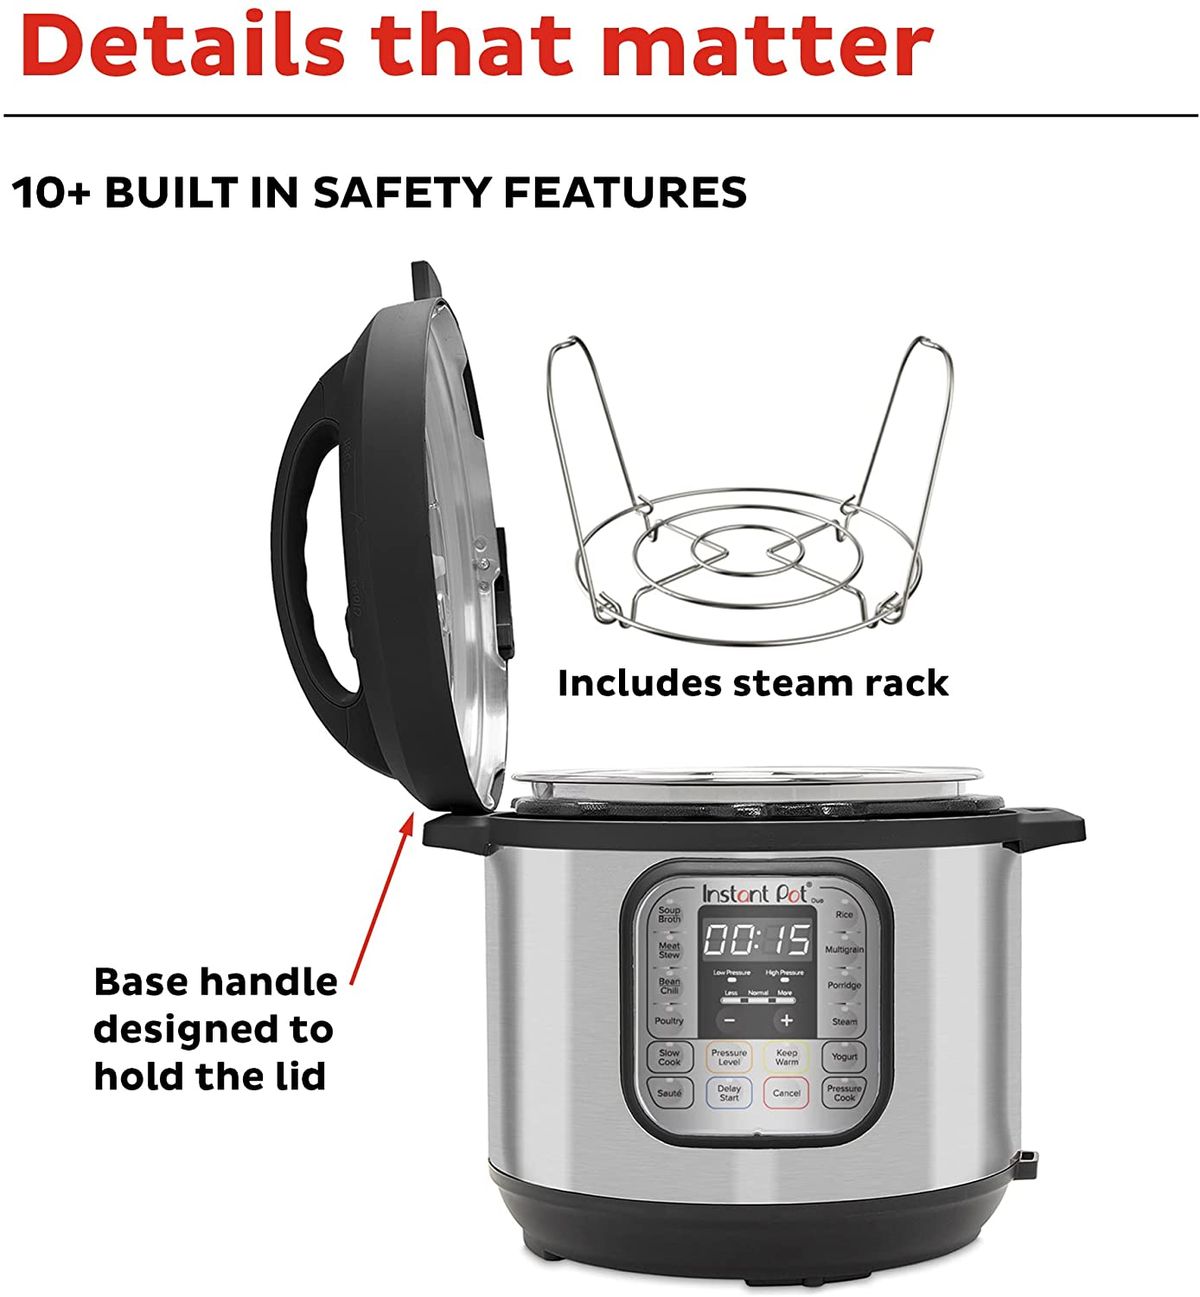 Instant Pot Duo 80 7-in-1 8 qt. 1200W Electric Pressure Cooker -  Black/Silver for sale online